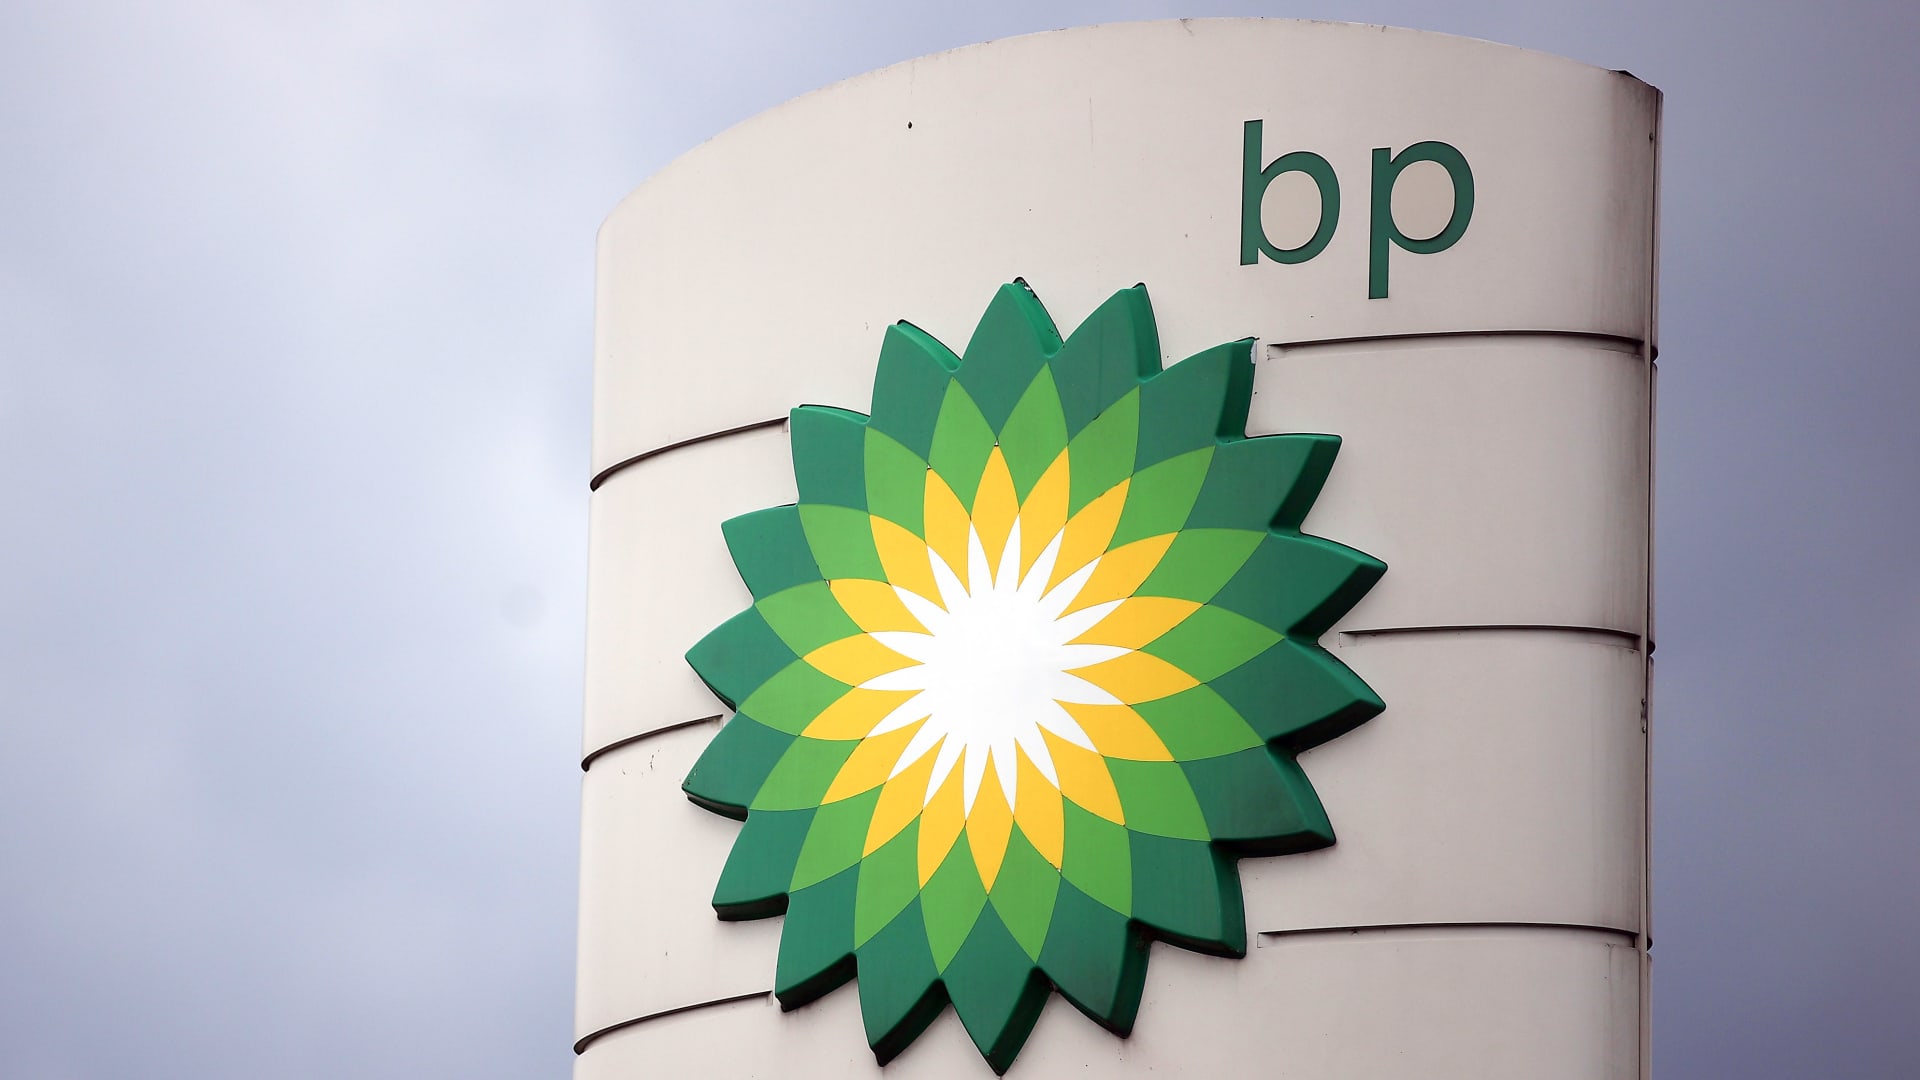 Shares of BP are up over 20% year-to-date.